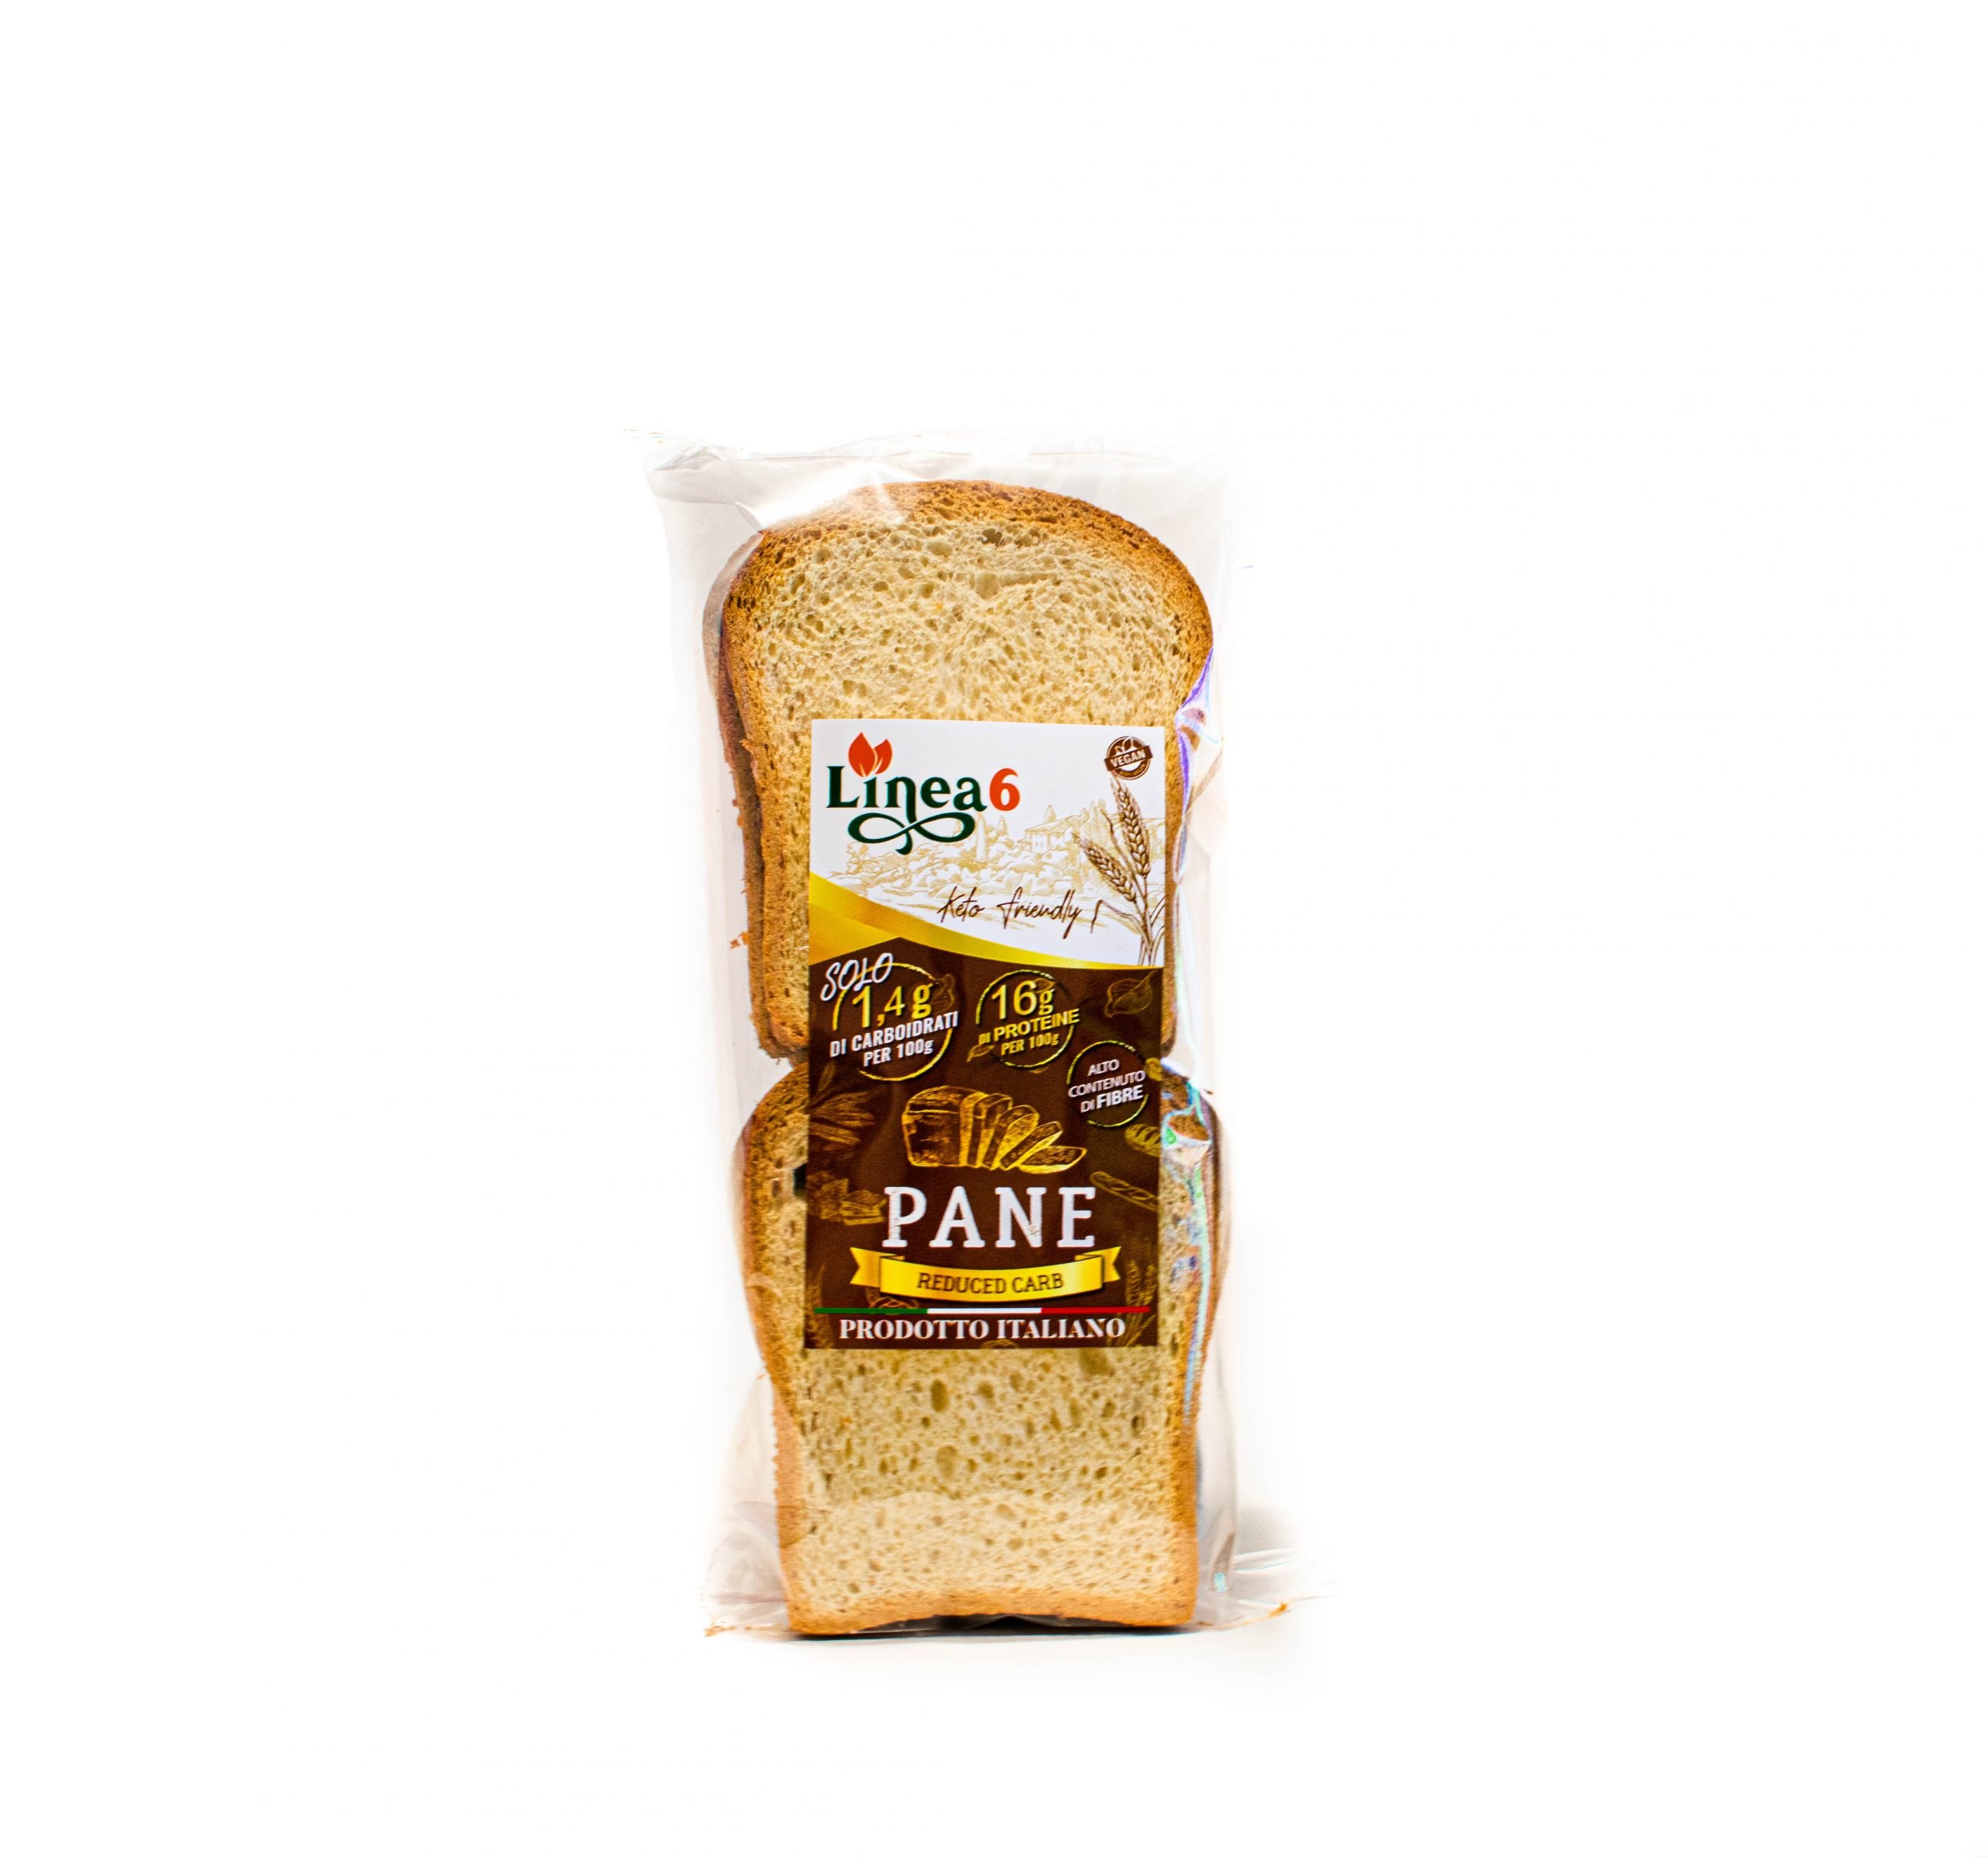 PAN BAULETTO REDUCED CARB 300G